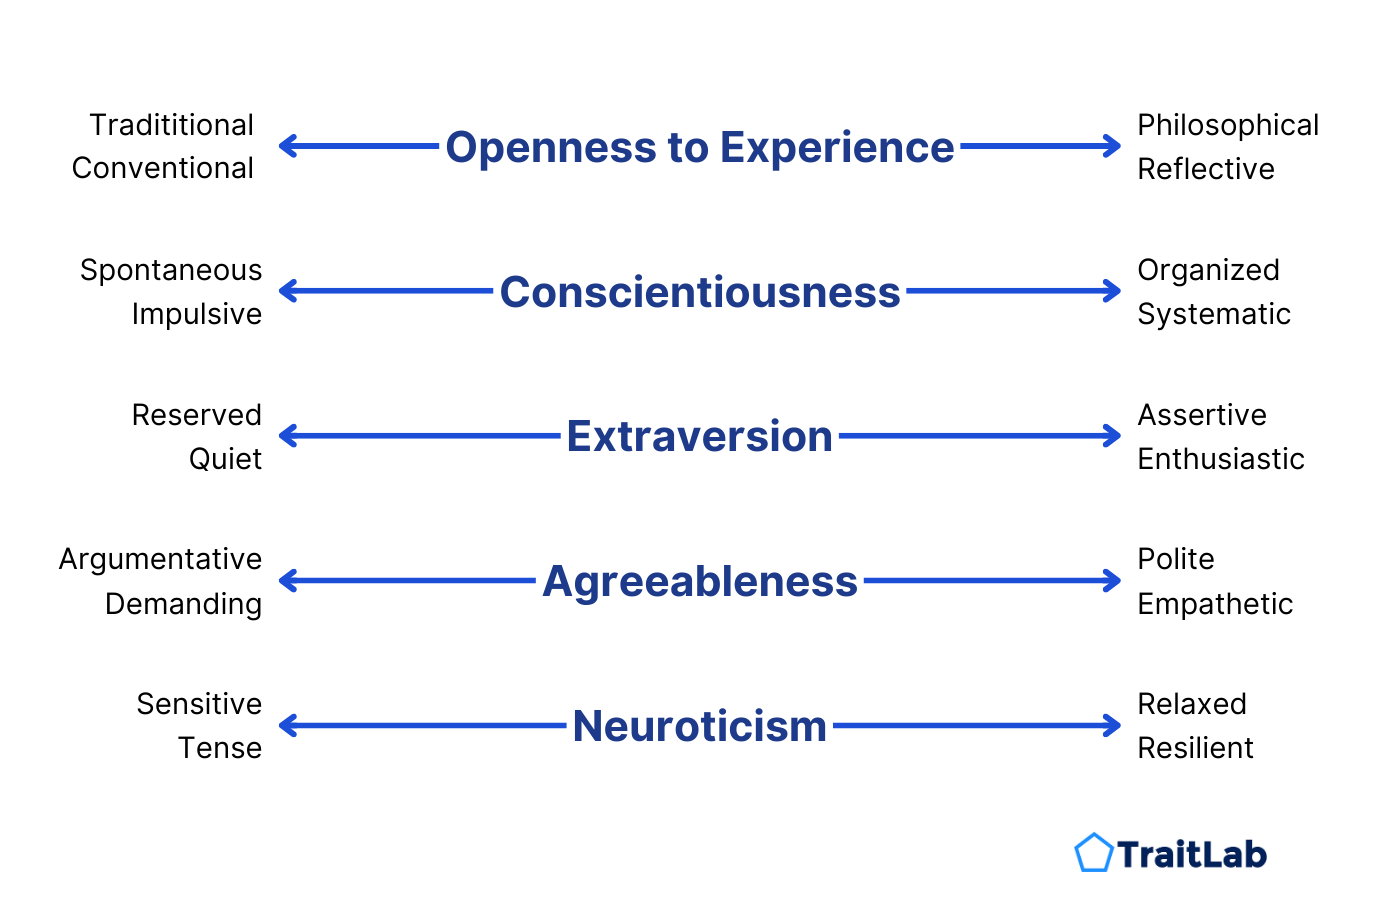 An chart showing Big Five personality traits or dimensions, including Openness to Experience, Conscientiousness, Extraversion, Agreeableness, and Neuroticism (also known as Emotional Stability).